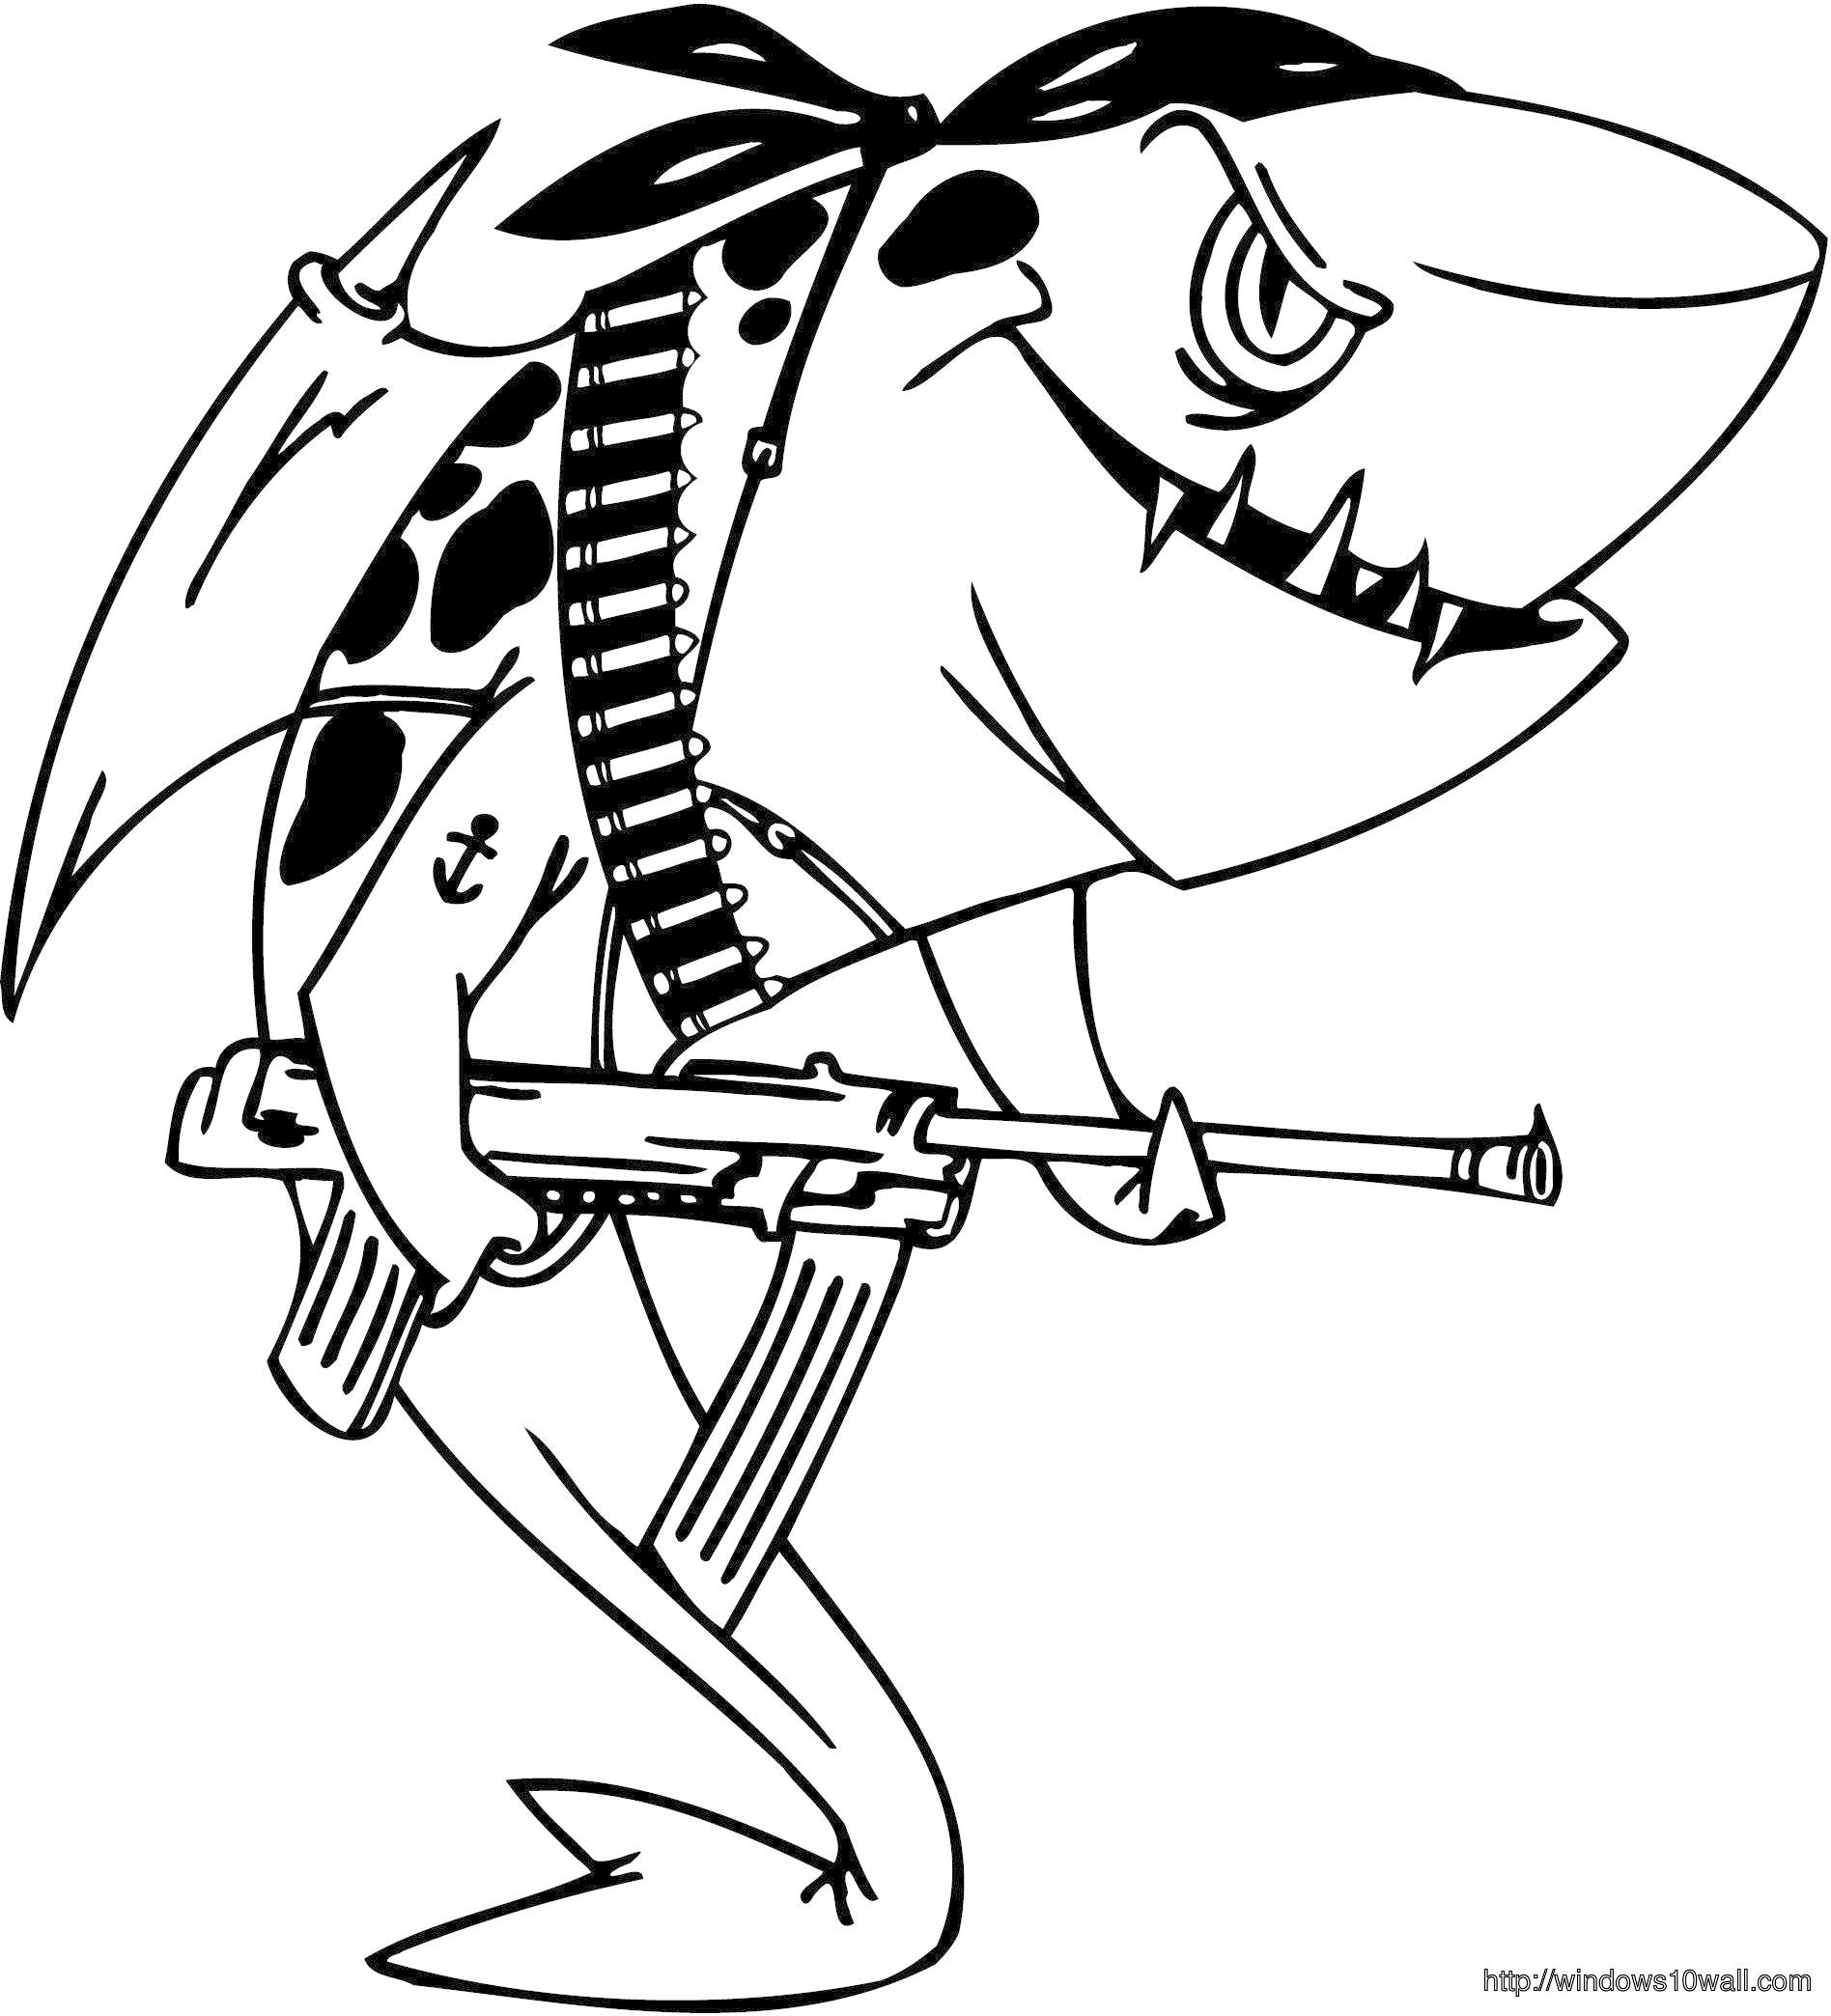 Military Shark Coloring Page for Kids Wallpaper